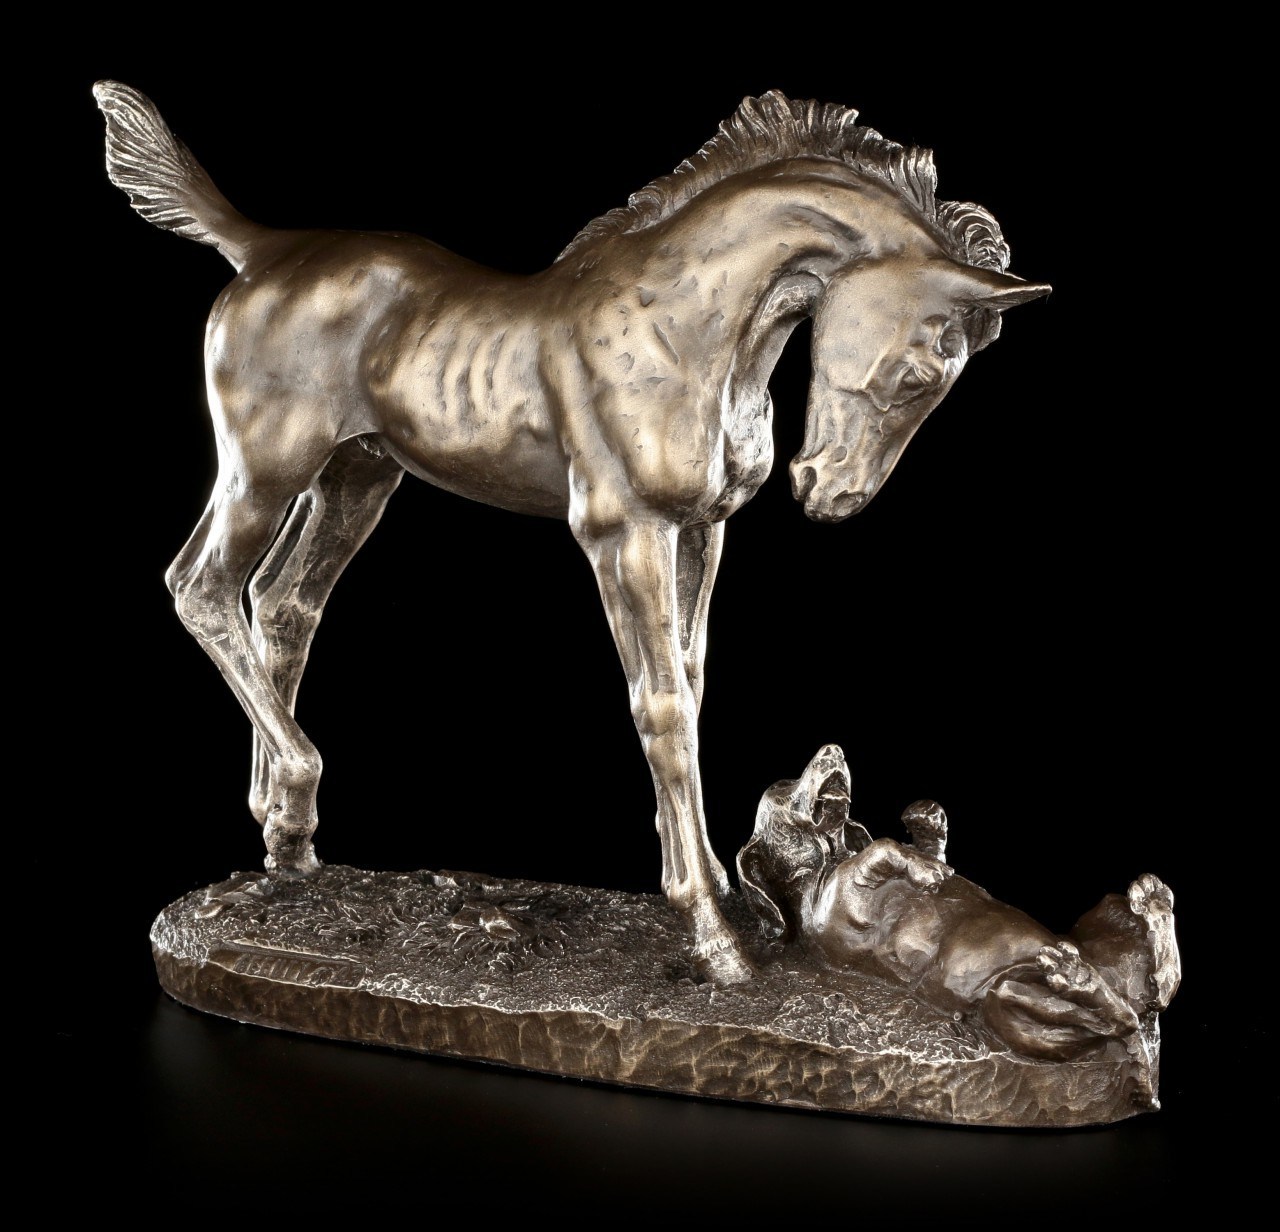 Horse Figurine - First Encounters - by David Geenty